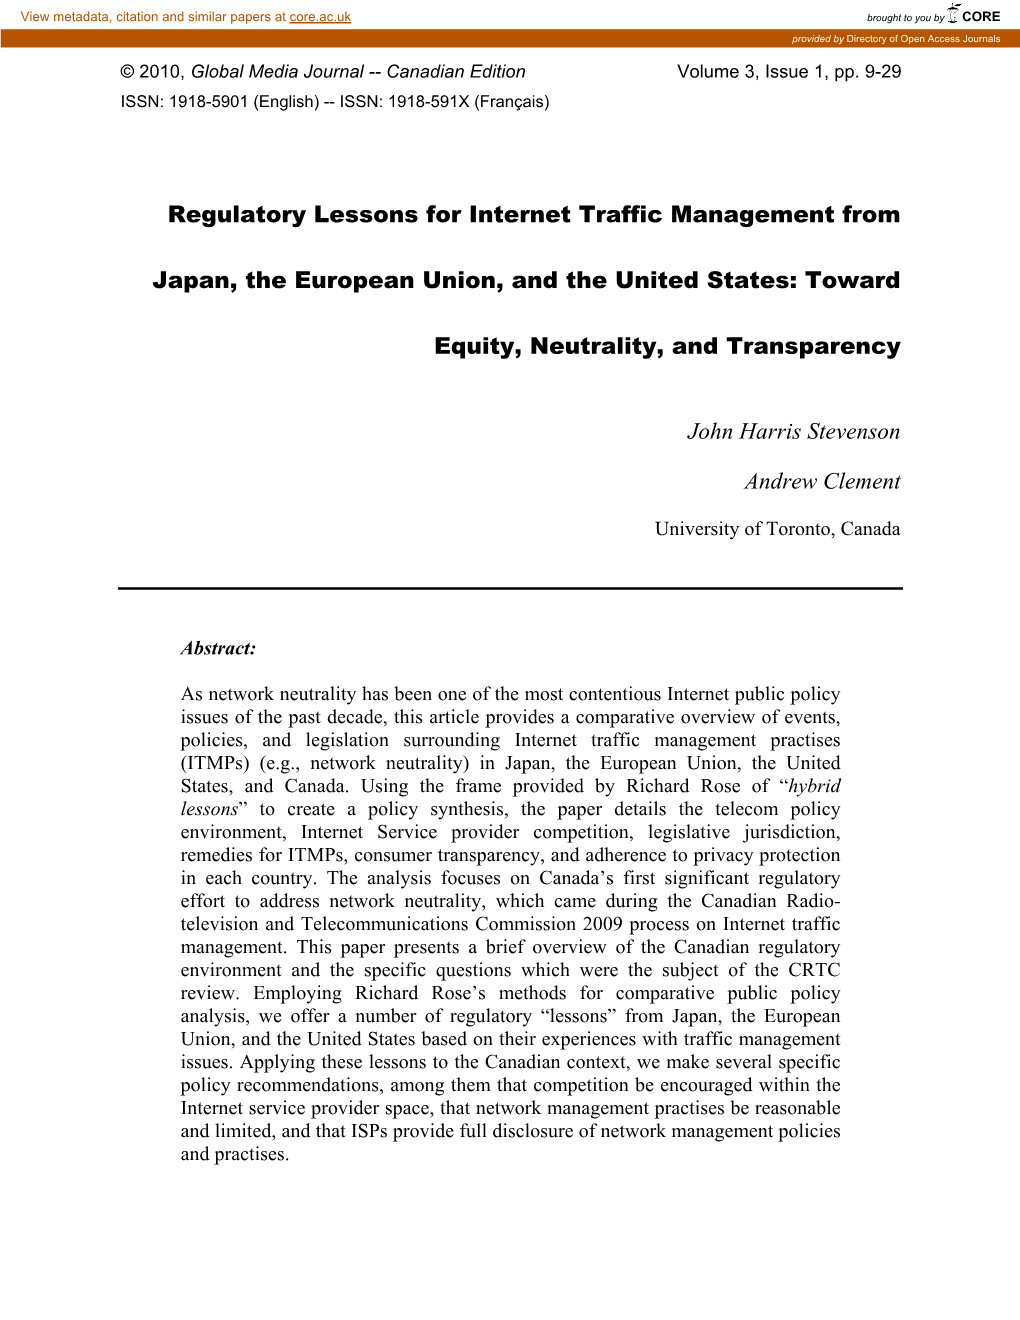 Regulatory Lessons for Internet Traffic Management from Japan, the European Union, and the United States: Toward Equity, Neutrality, and Transparency